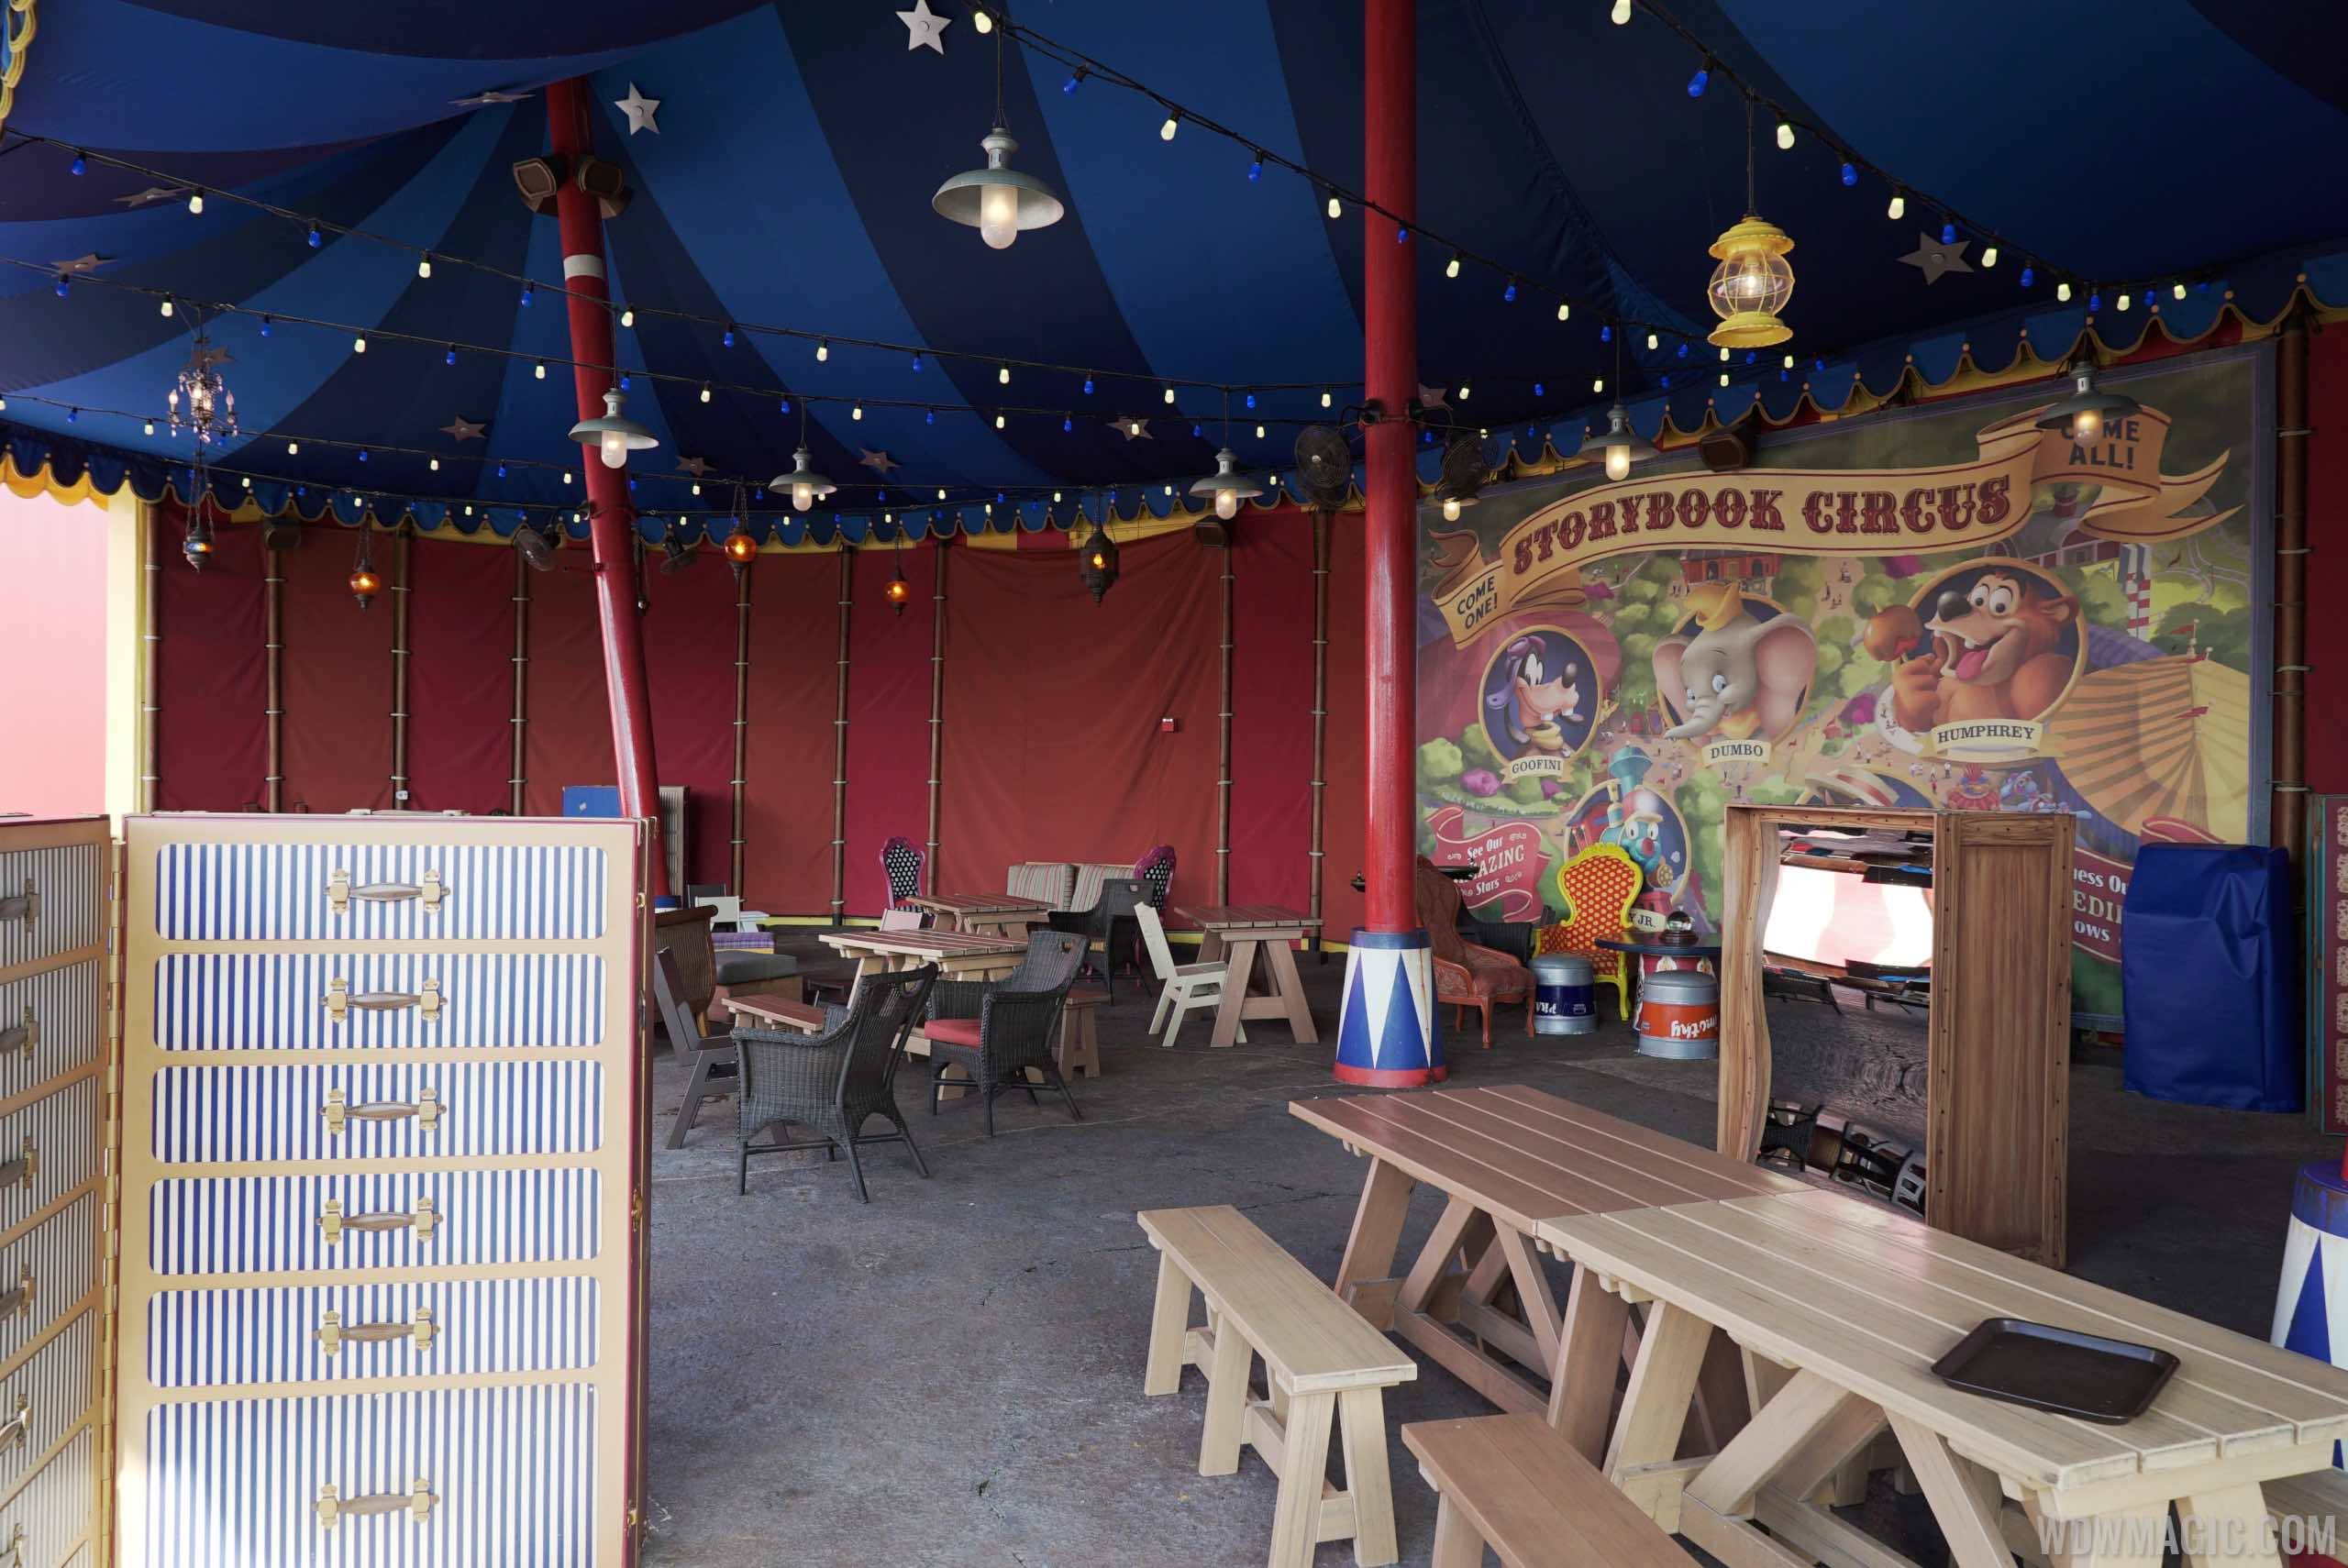 PHOTOS - Furniture arrives at Storybook Circus D-Zone providing a nice place to rest and relax